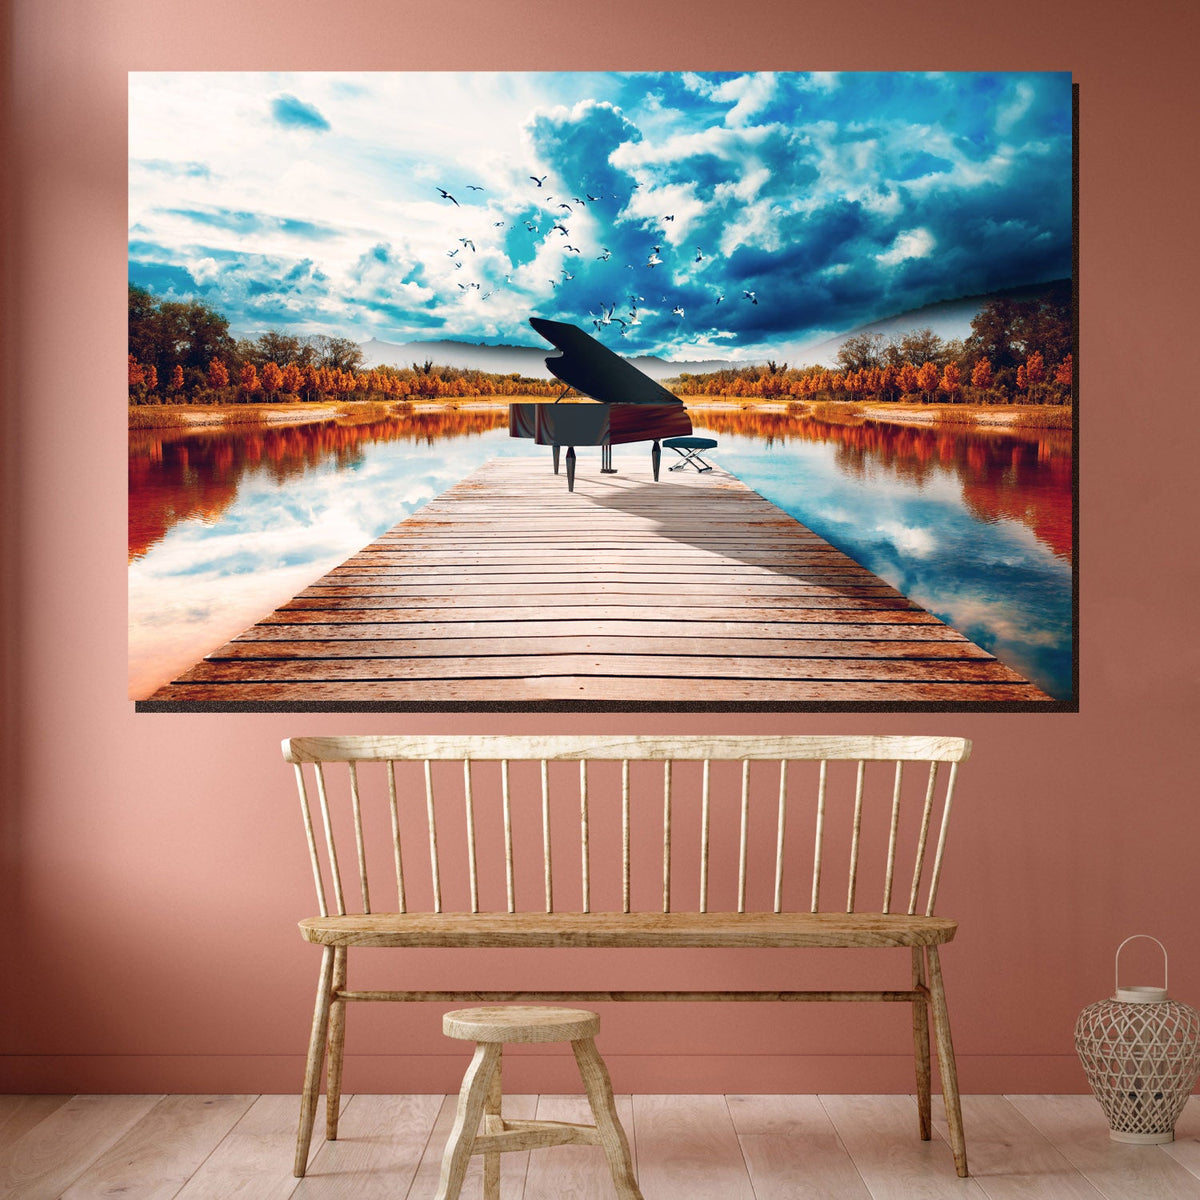 https://cdn.shopify.com/s/files/1/0387/9986/8044/products/PianoonthepierCanvasPrintStretched-1.jpg